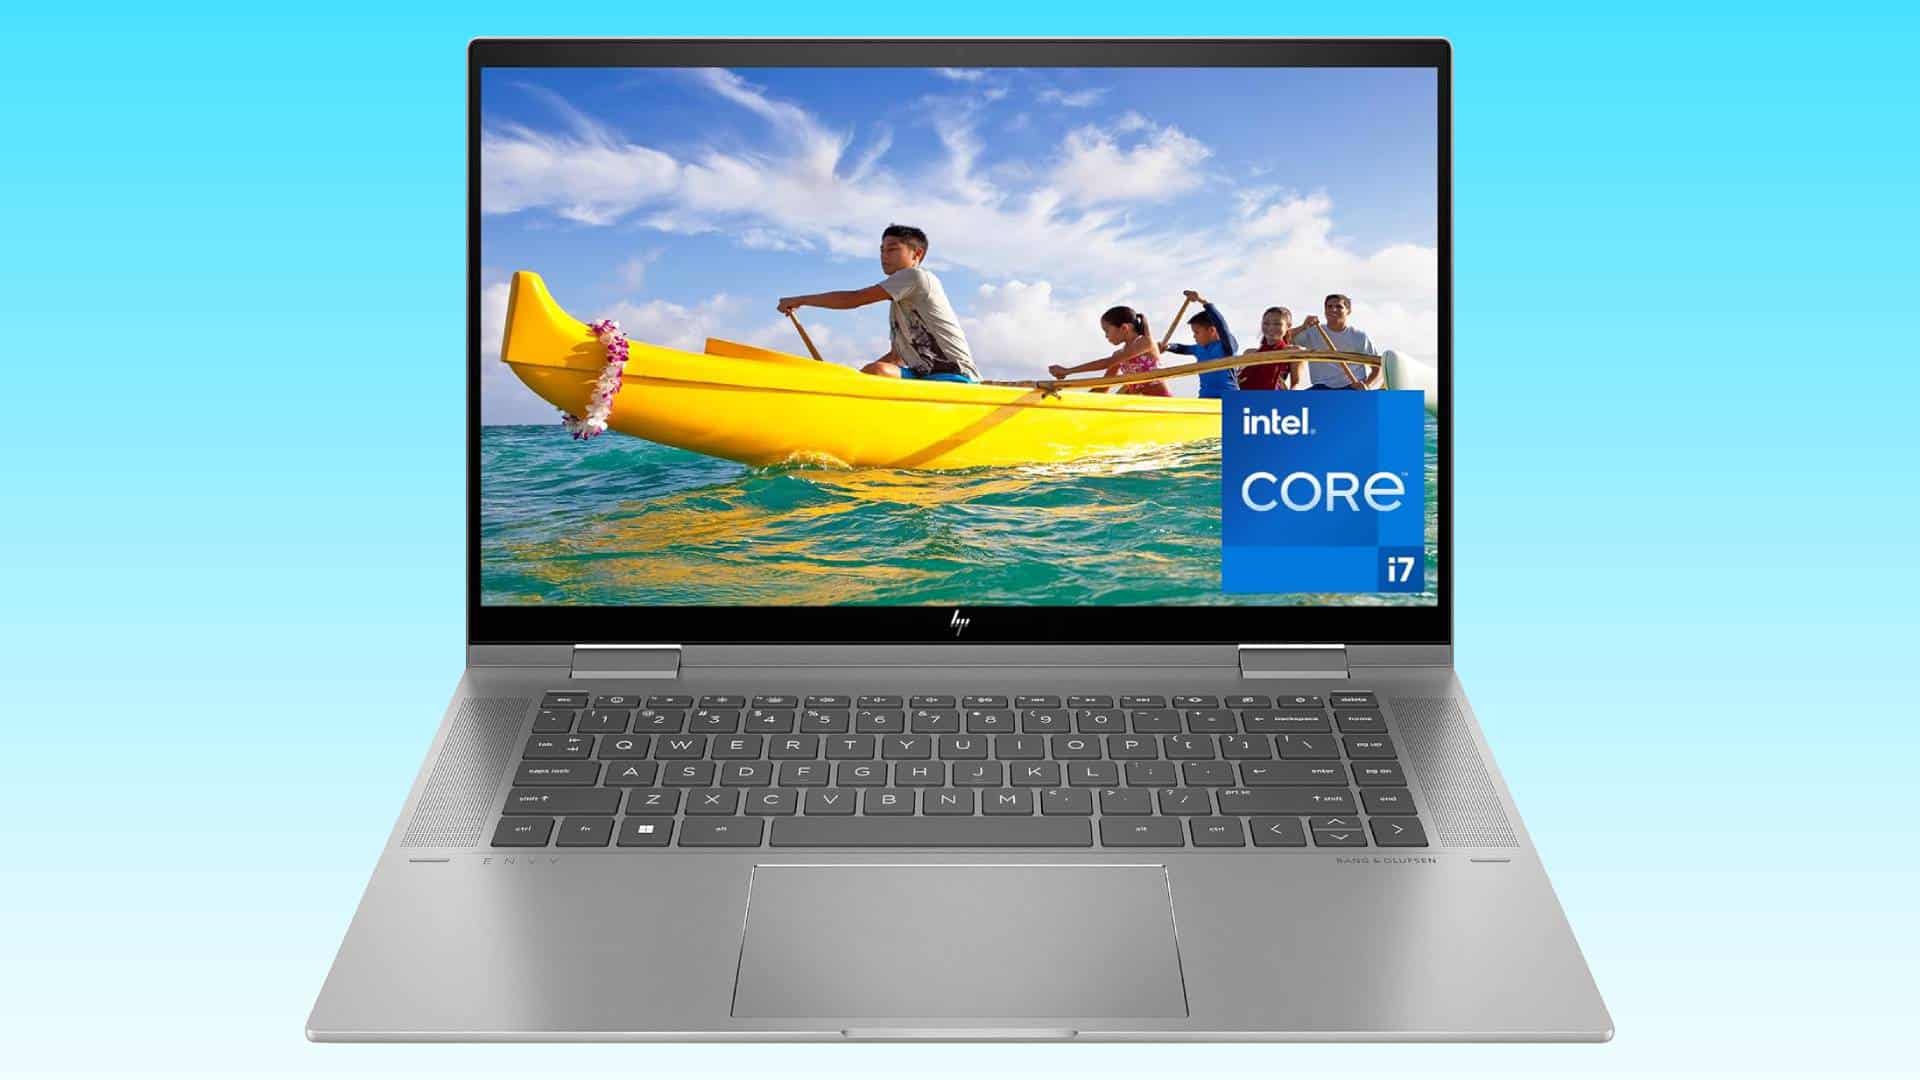 An HP Envy Touchscreen Laptop with an Intel Core i7 sticker on display, showing a wallpaper of people enjoying a boat ride.